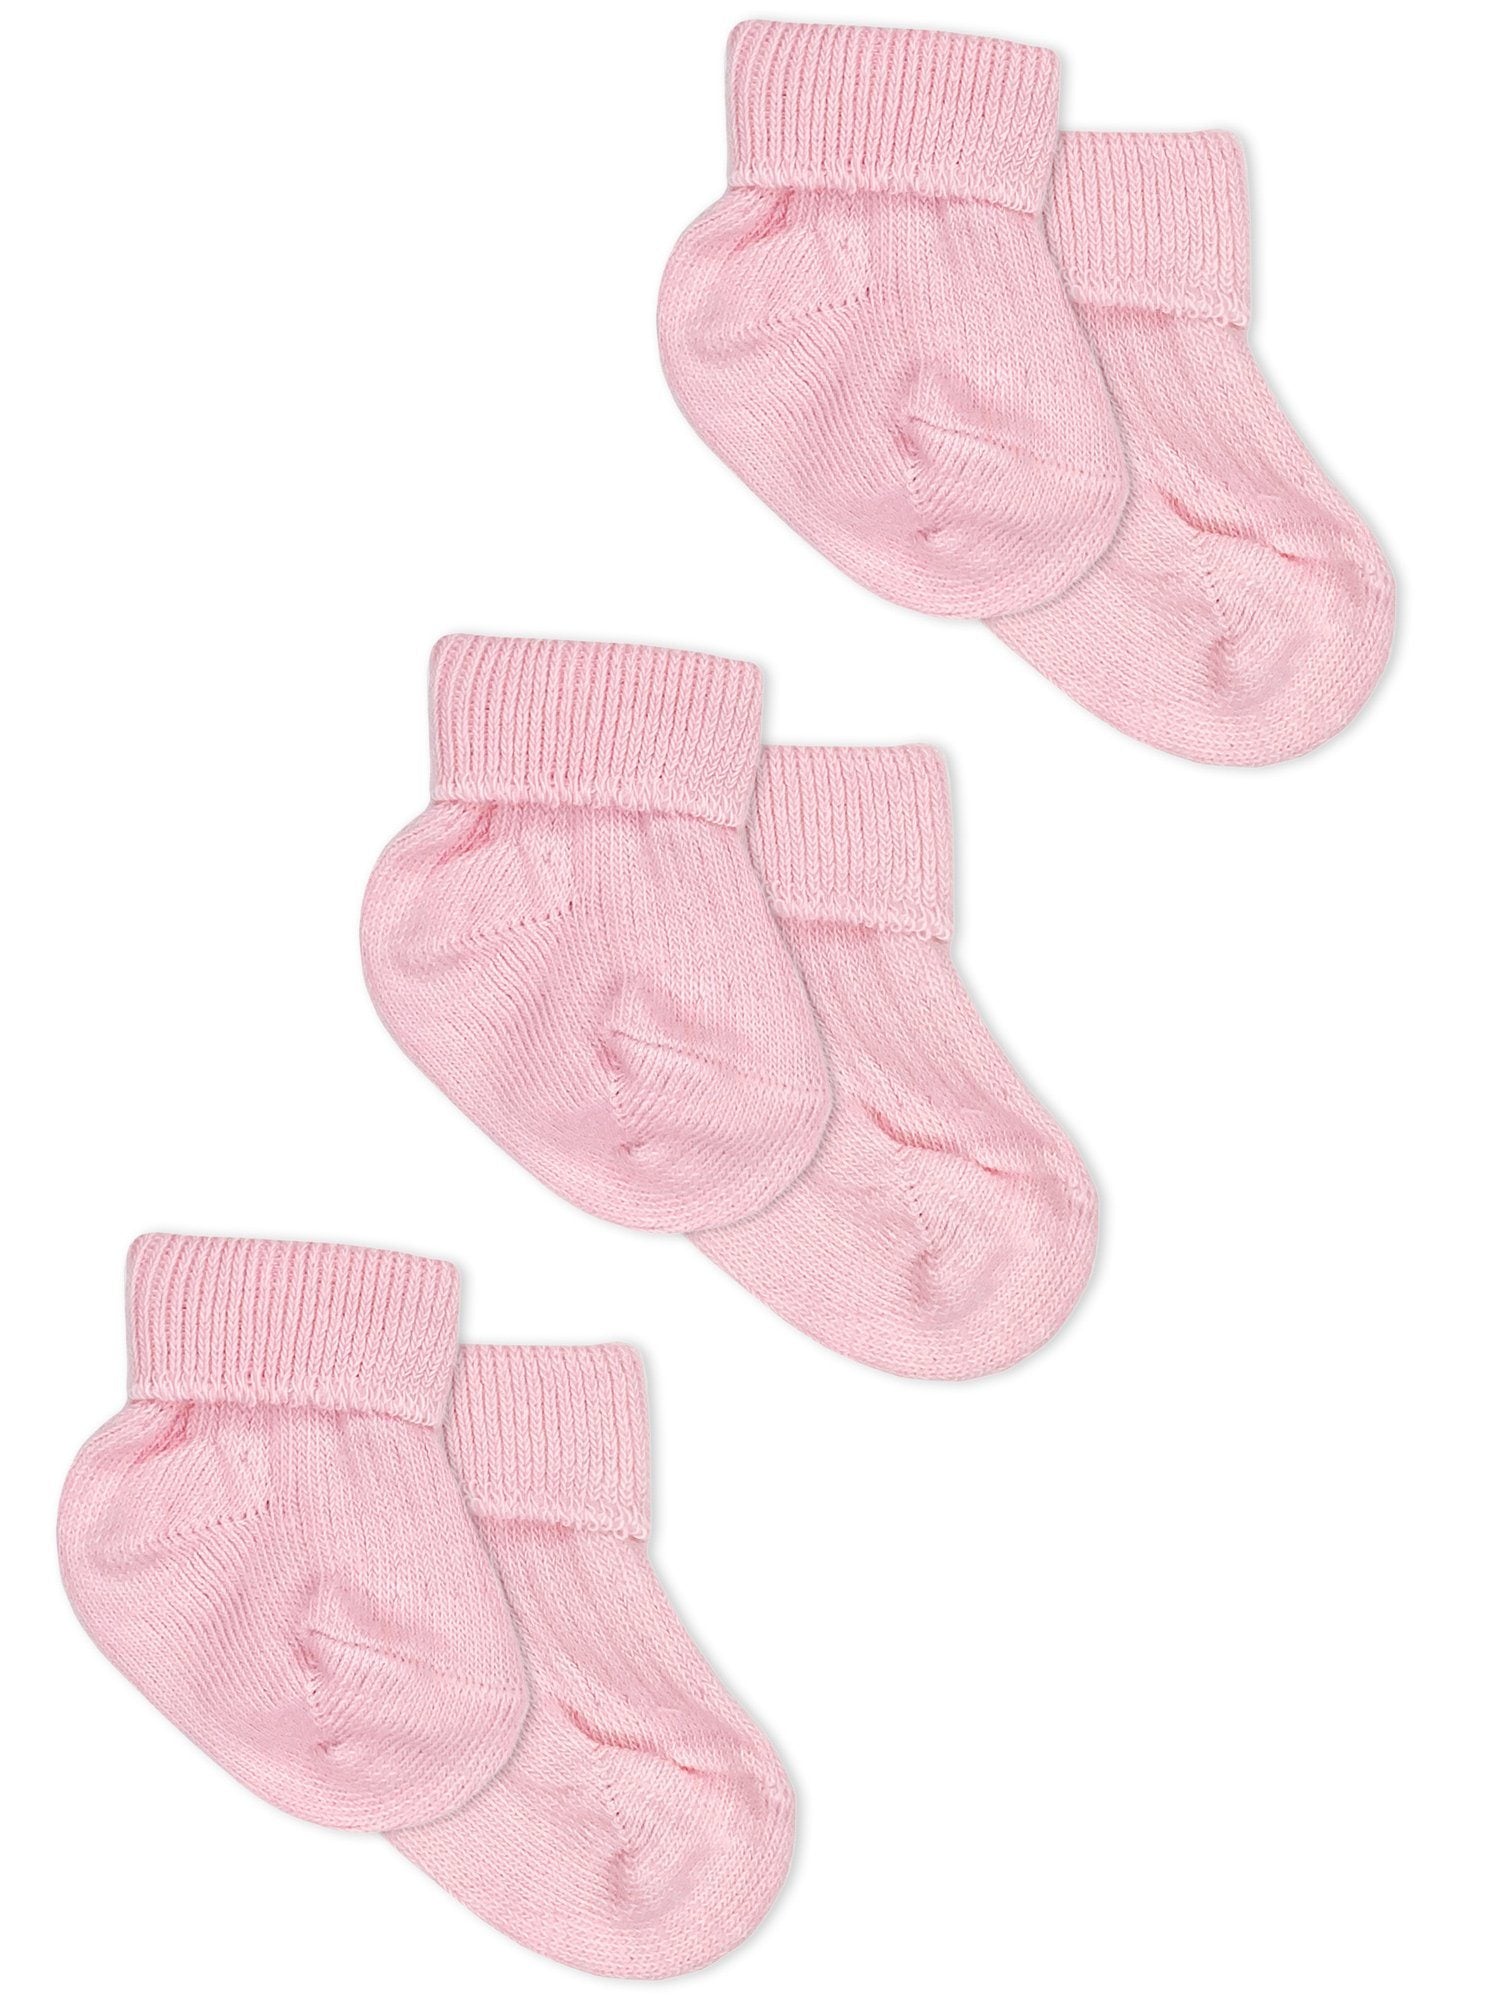 3 Pack - Pink Premature Baby Socks - Socks - Little Mouse Baby Clothing & Gifts